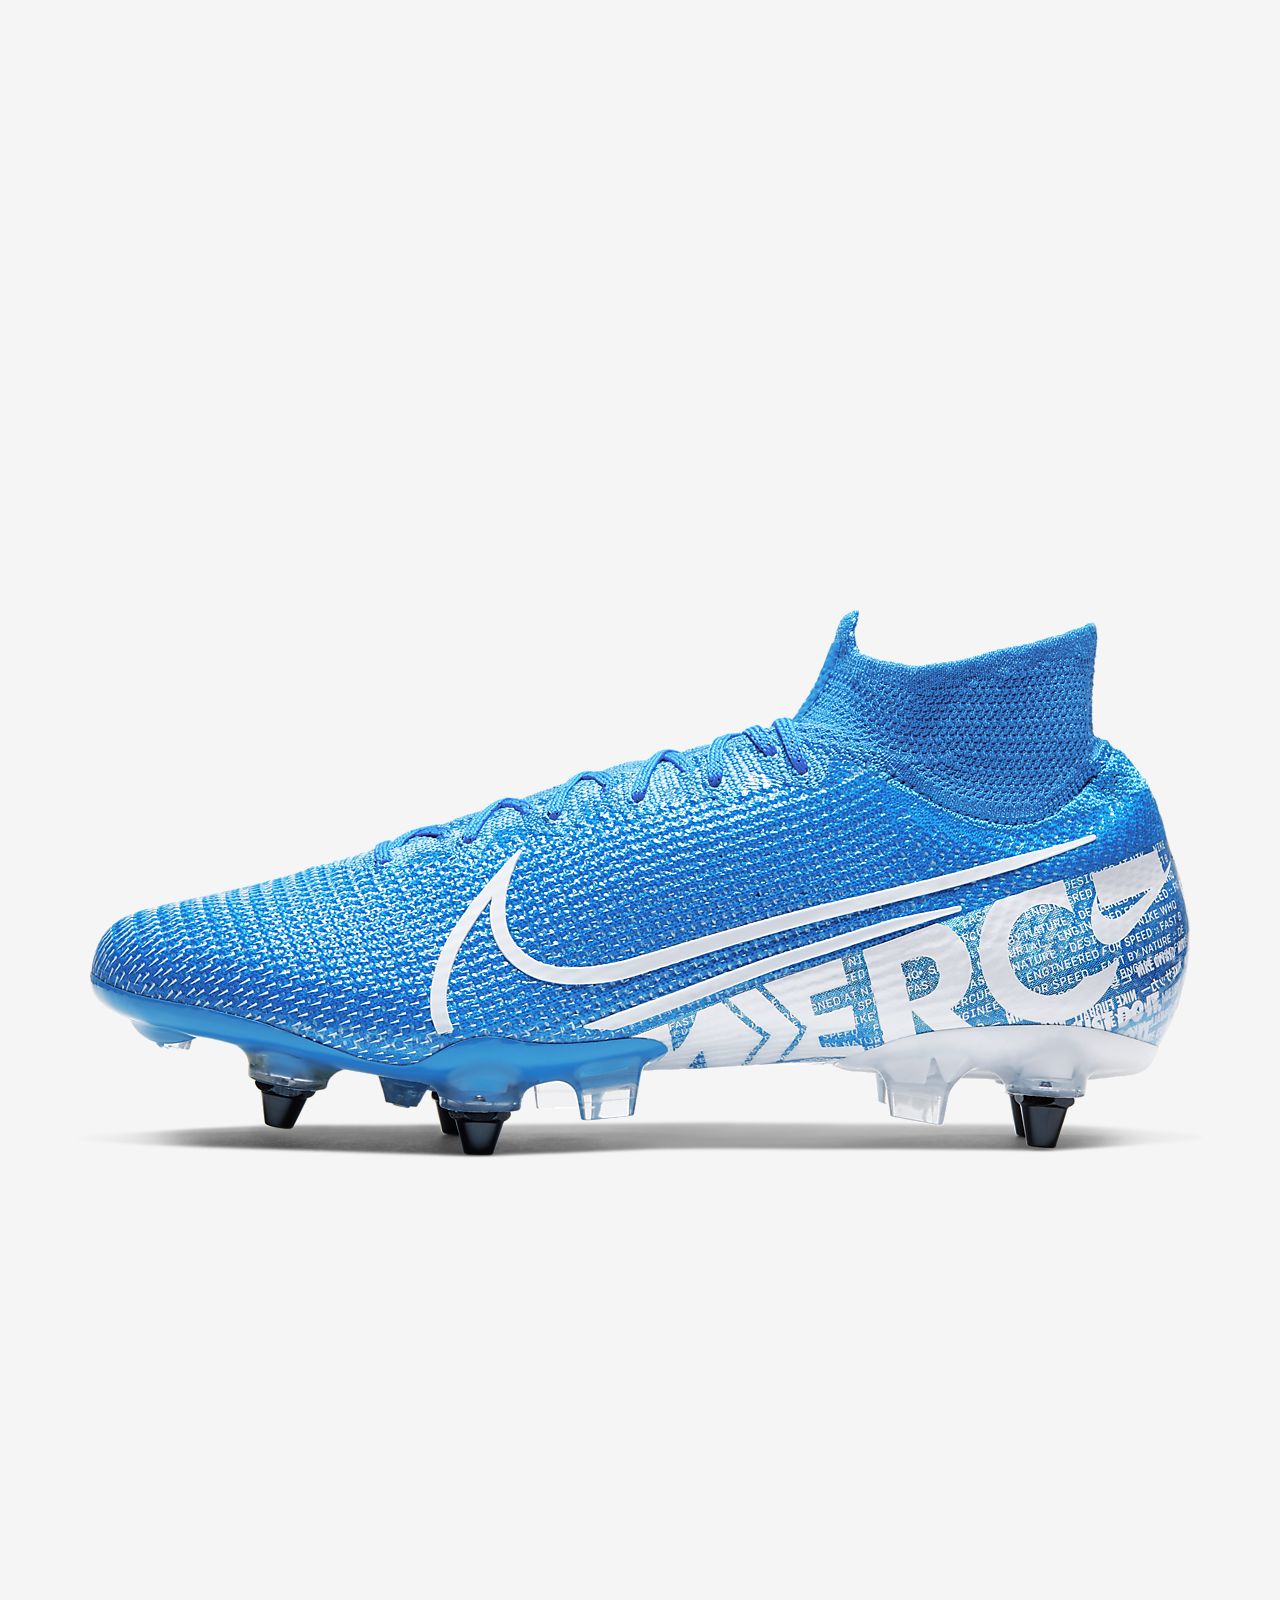 Nike Mercurial Superfly Produkte Online Shop Outlet.